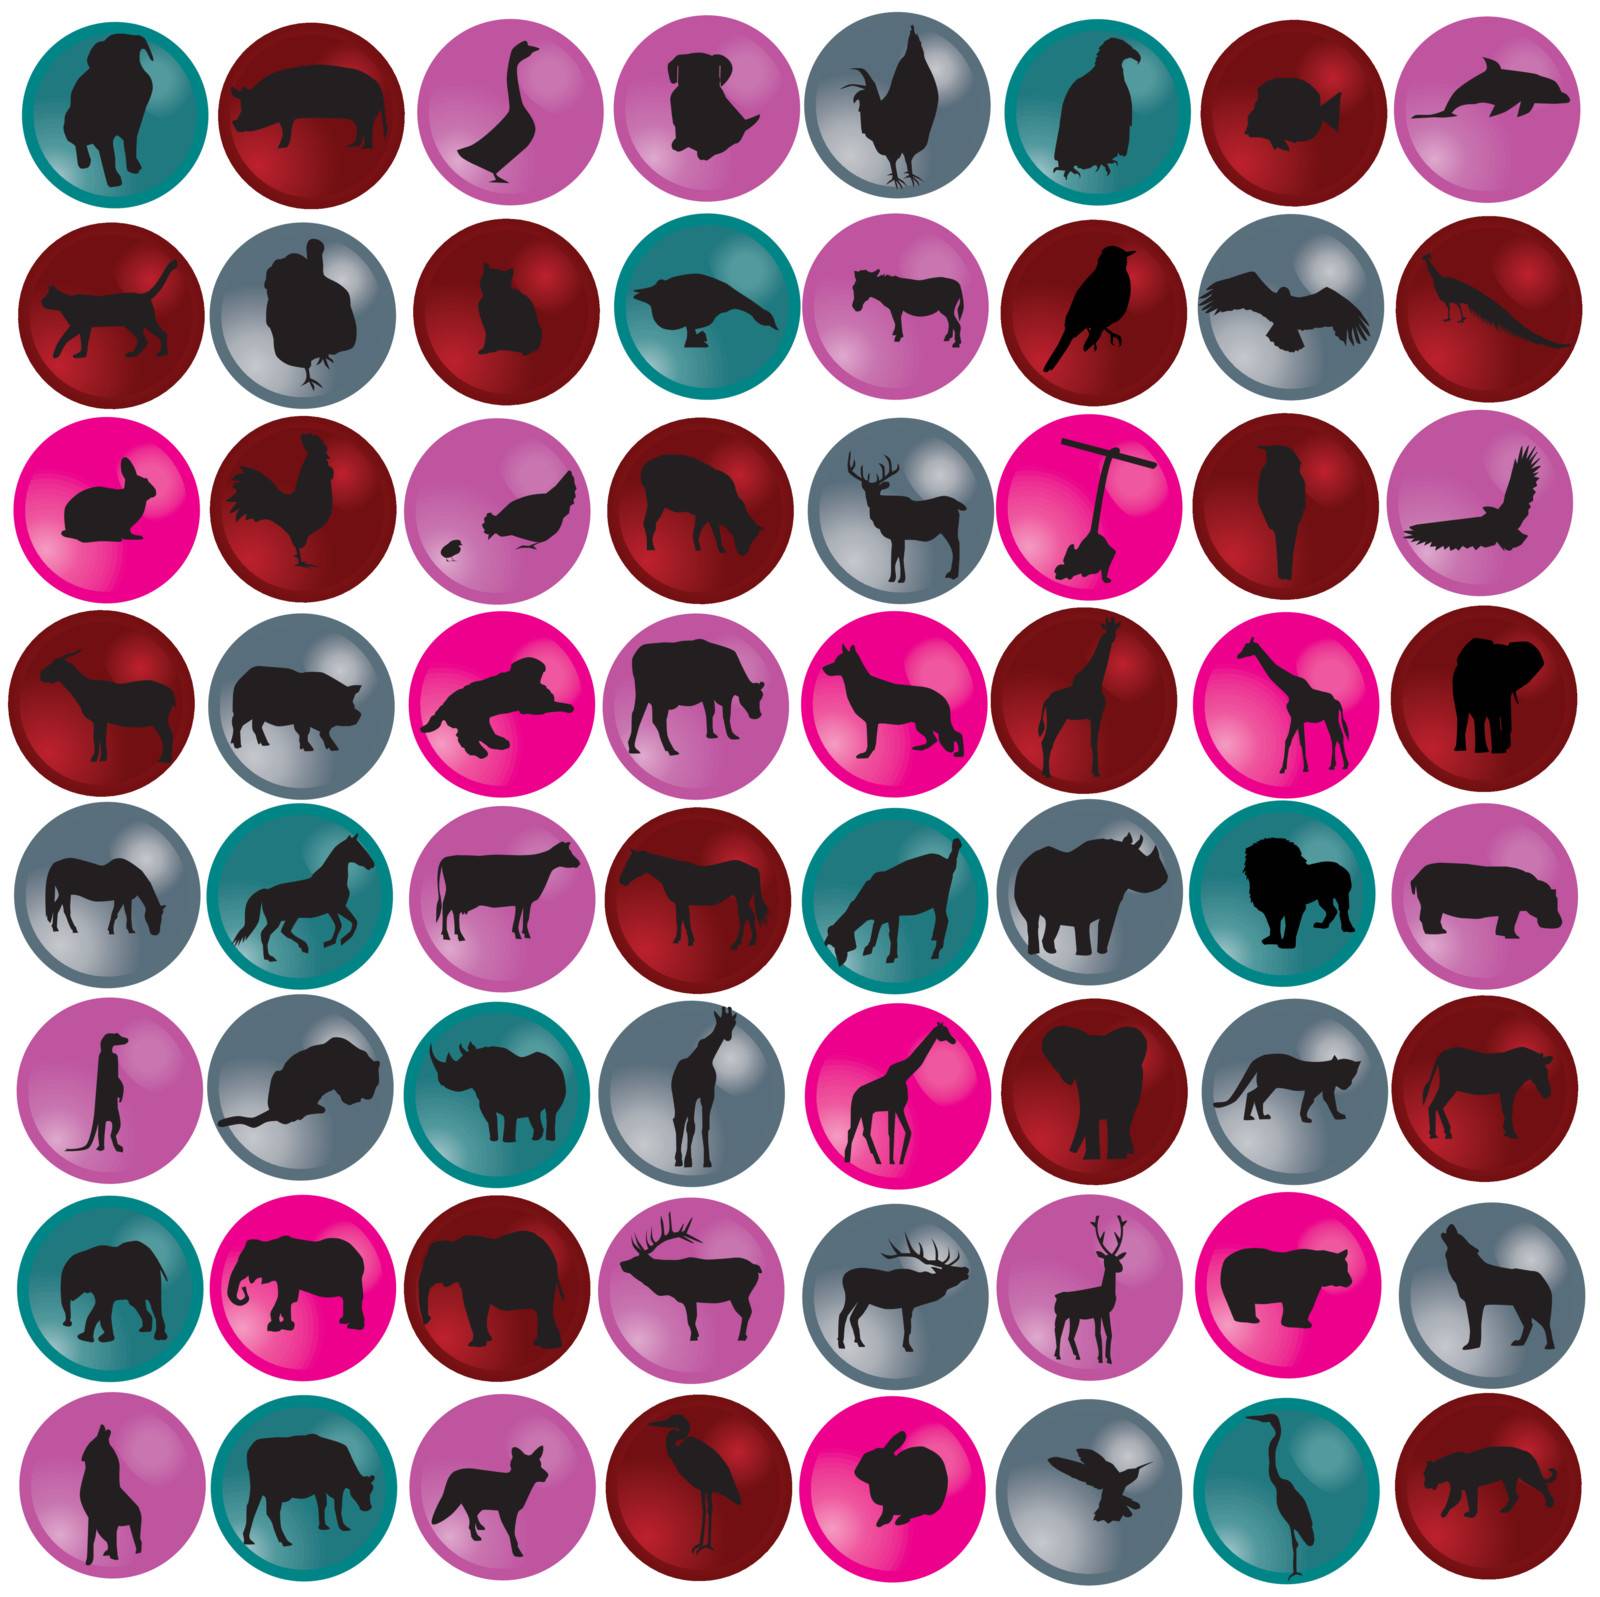 vector illustration of animal silhouettes on buttons